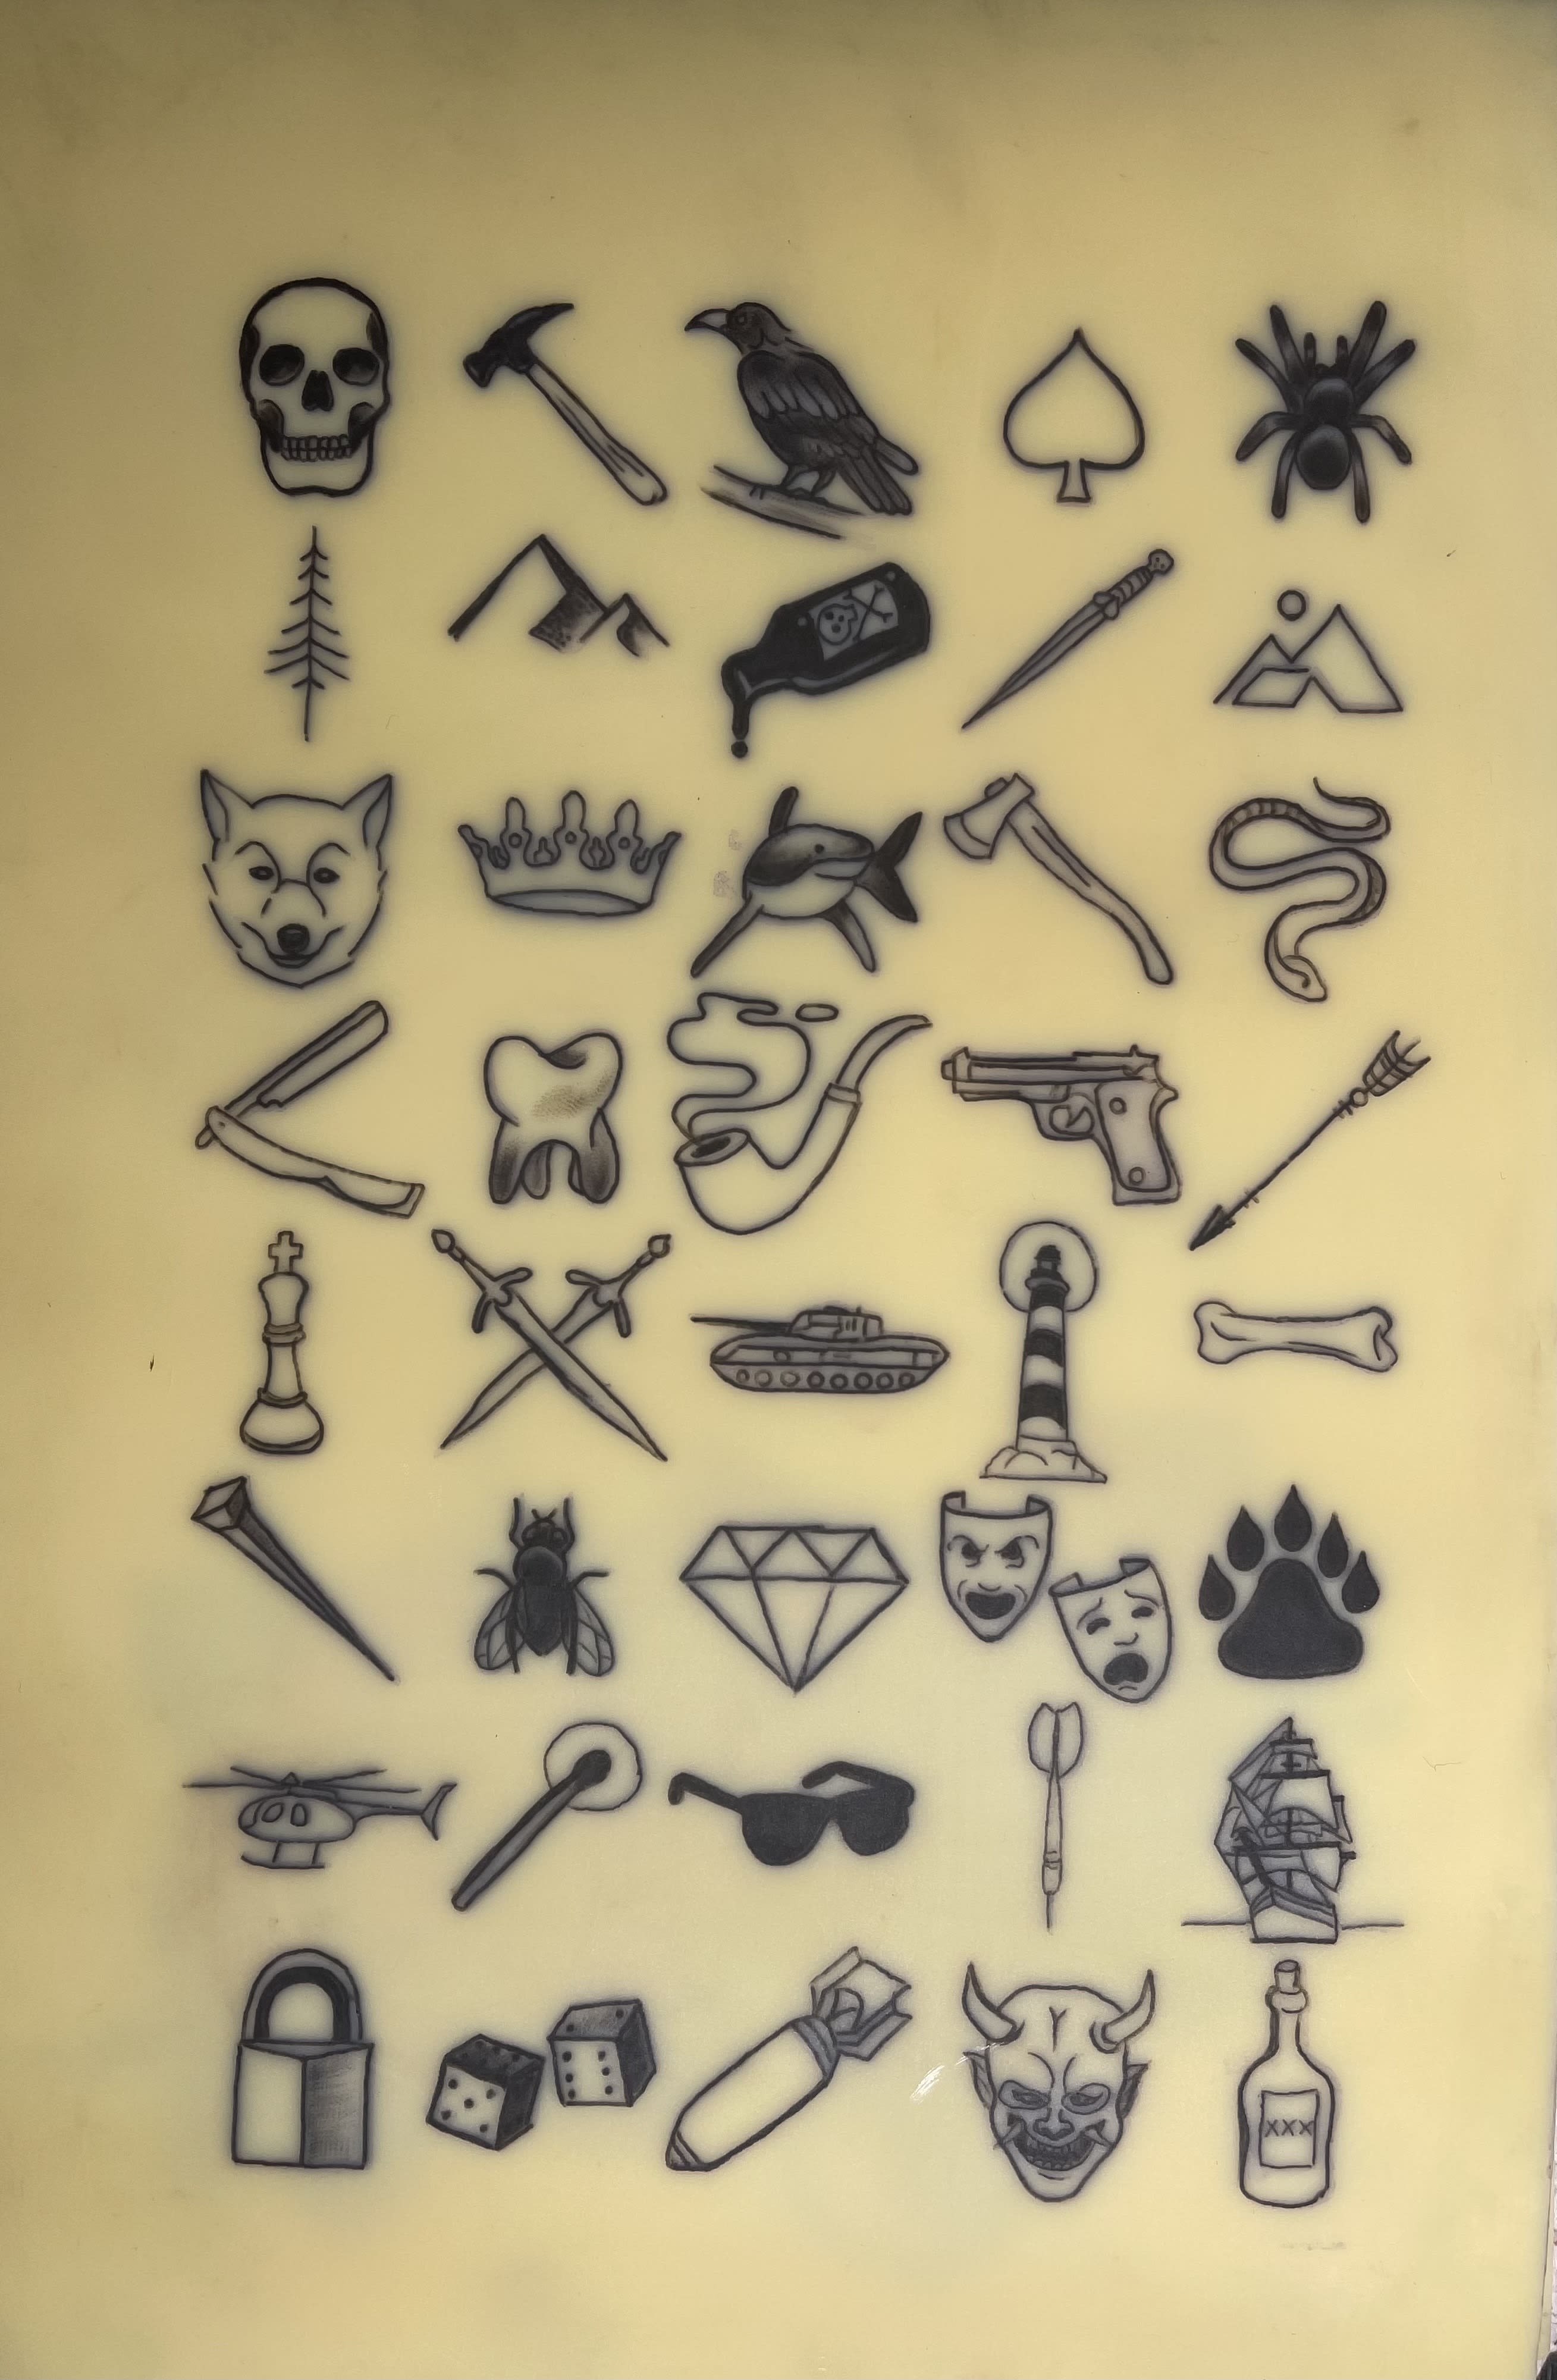 40 small script and small traditional tattoos for Sale in Abilene TX   OfferUp